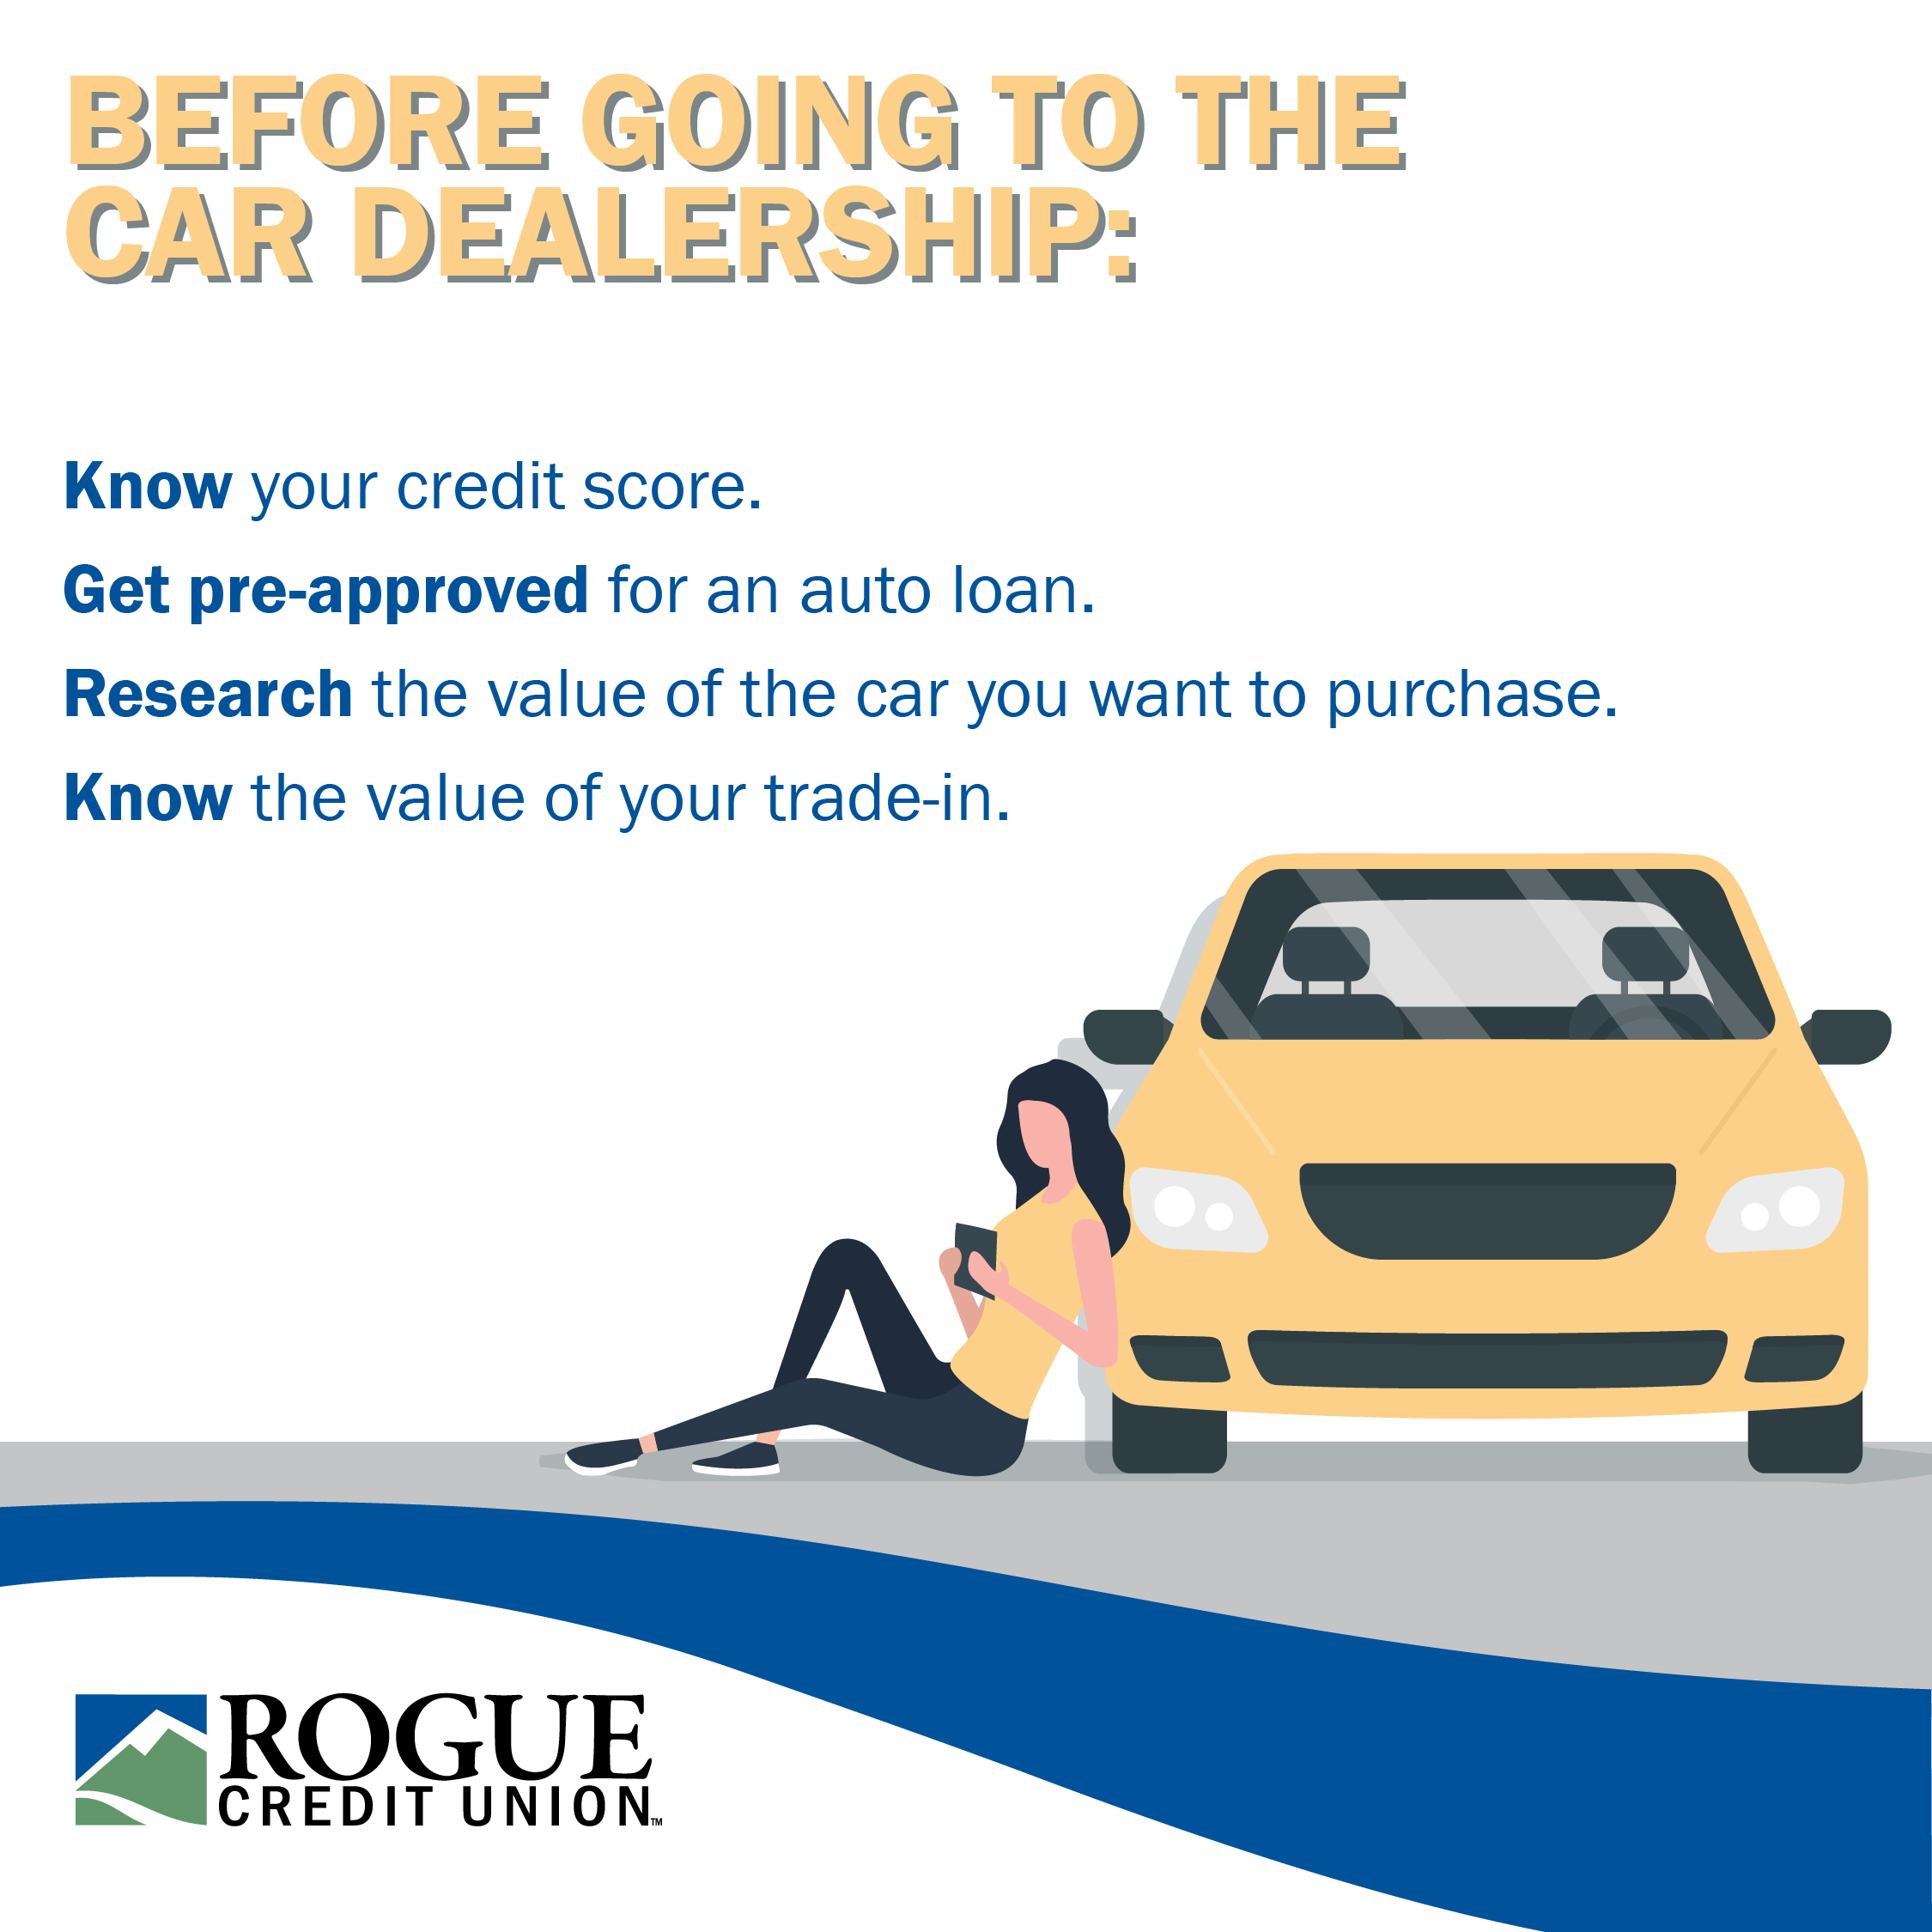 Tips Before Going to the Dealership